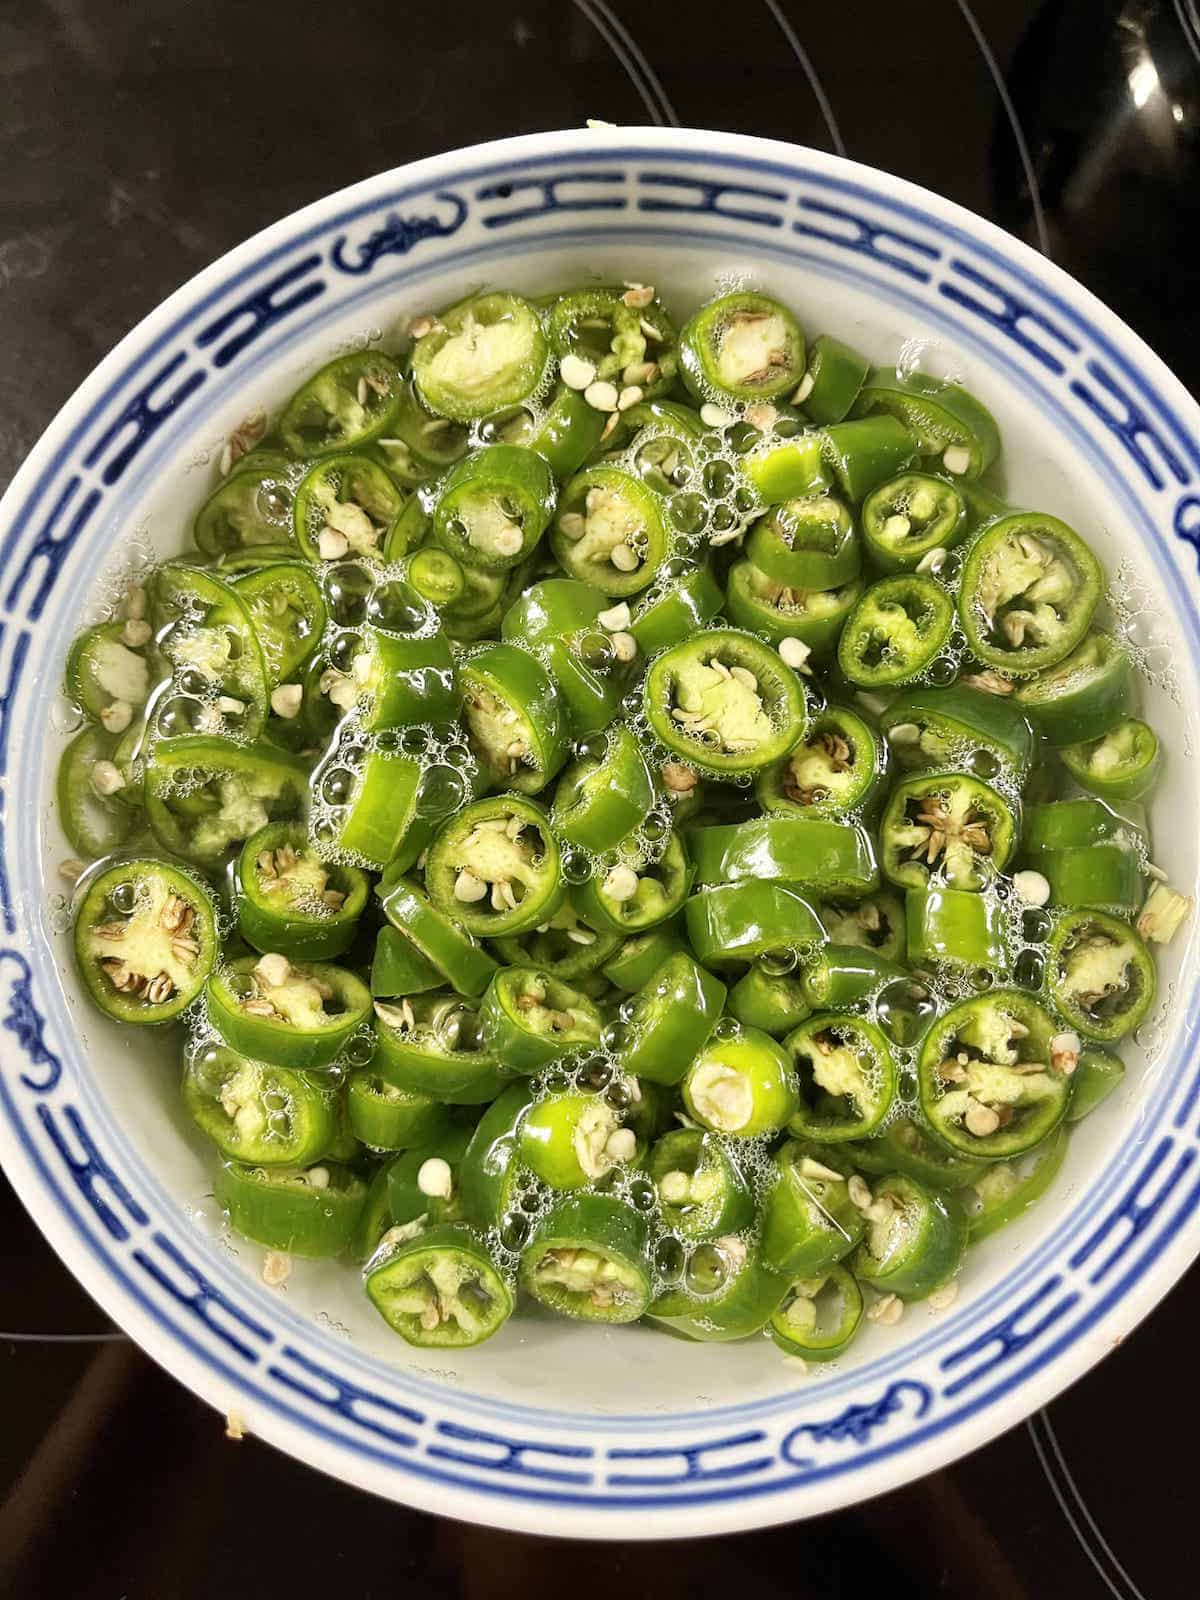 Sliced green chilies soaking in a bowl of hot water.